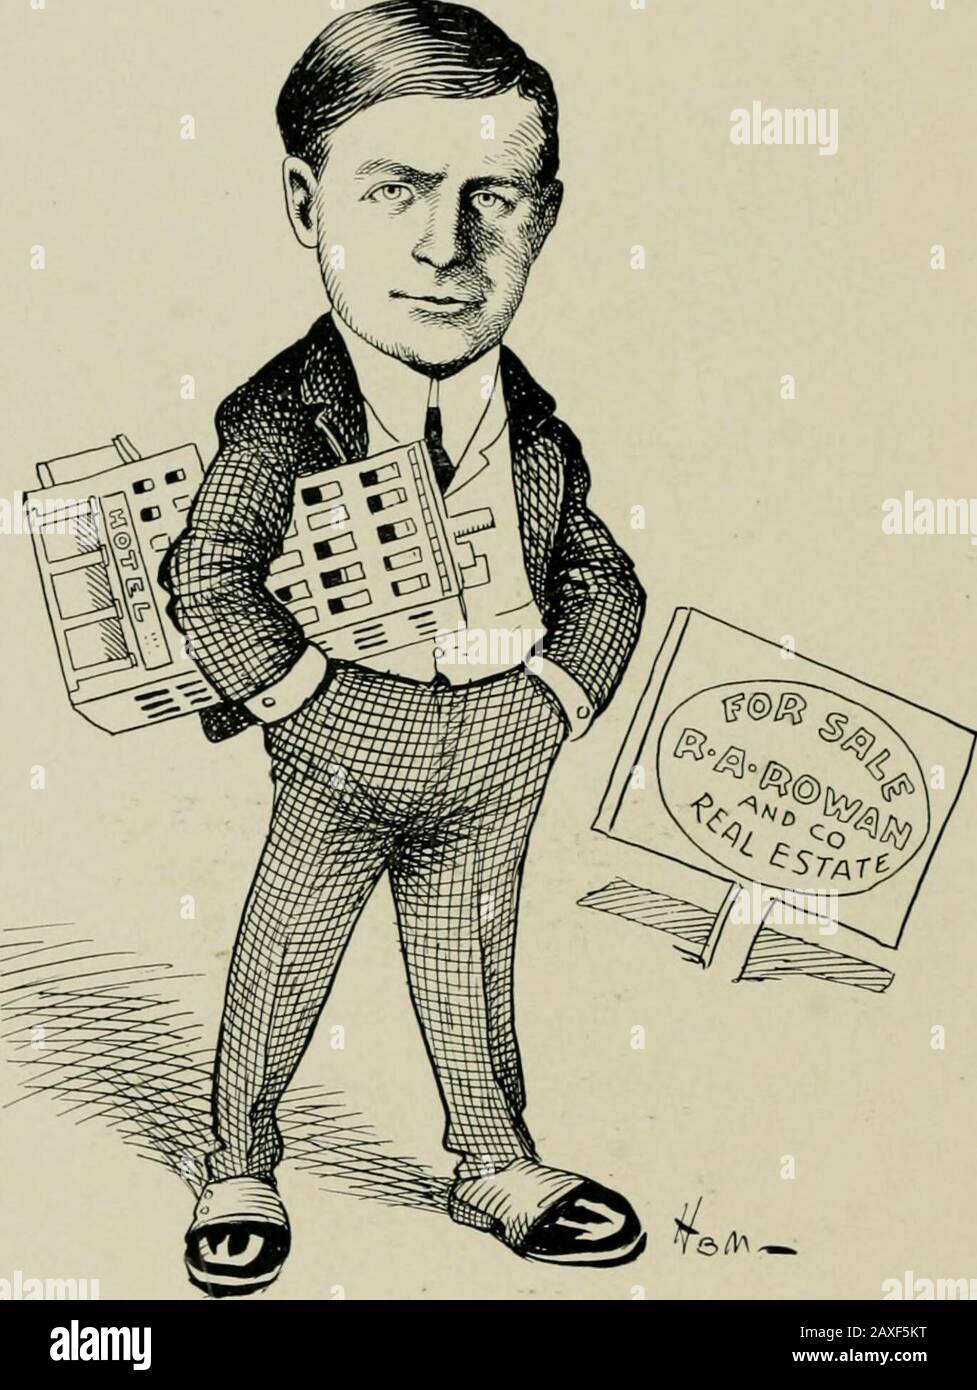 'As we see 'em,' a volume of cartoons and caricatures of Los Angeles citizens . F. K. RULE,Treasurer S. P., L. A. & S. L. R. R. Co.. R. A. ROWAN,Real Estate. Like. Stock Photo